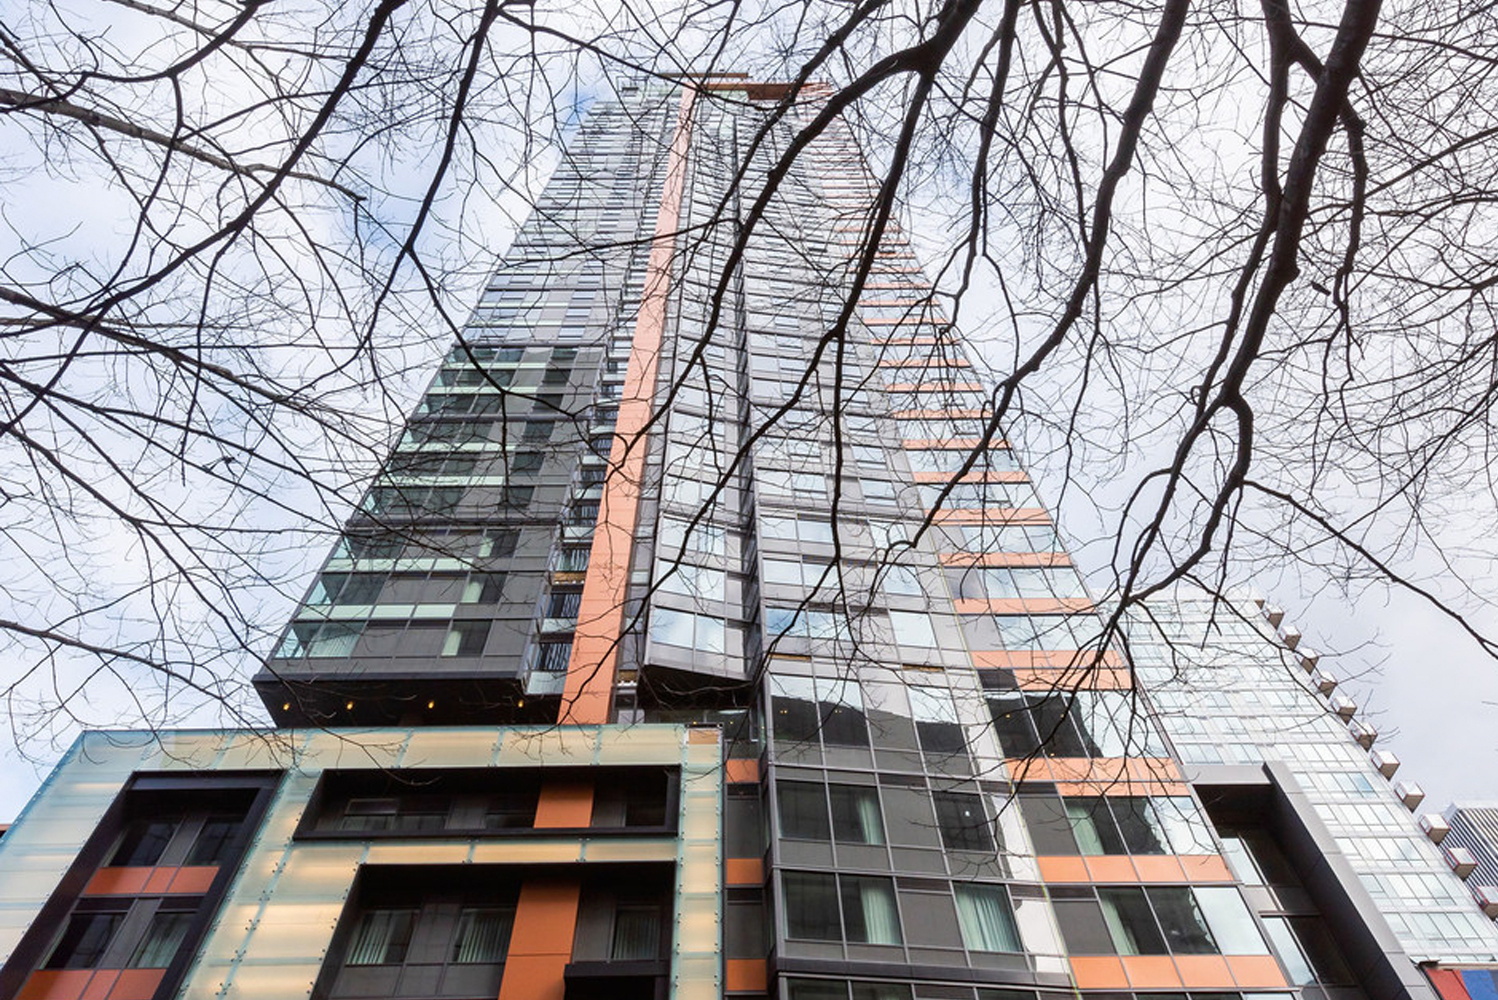 The Arriv tower opened as the newest mixed-use property in Seattle 